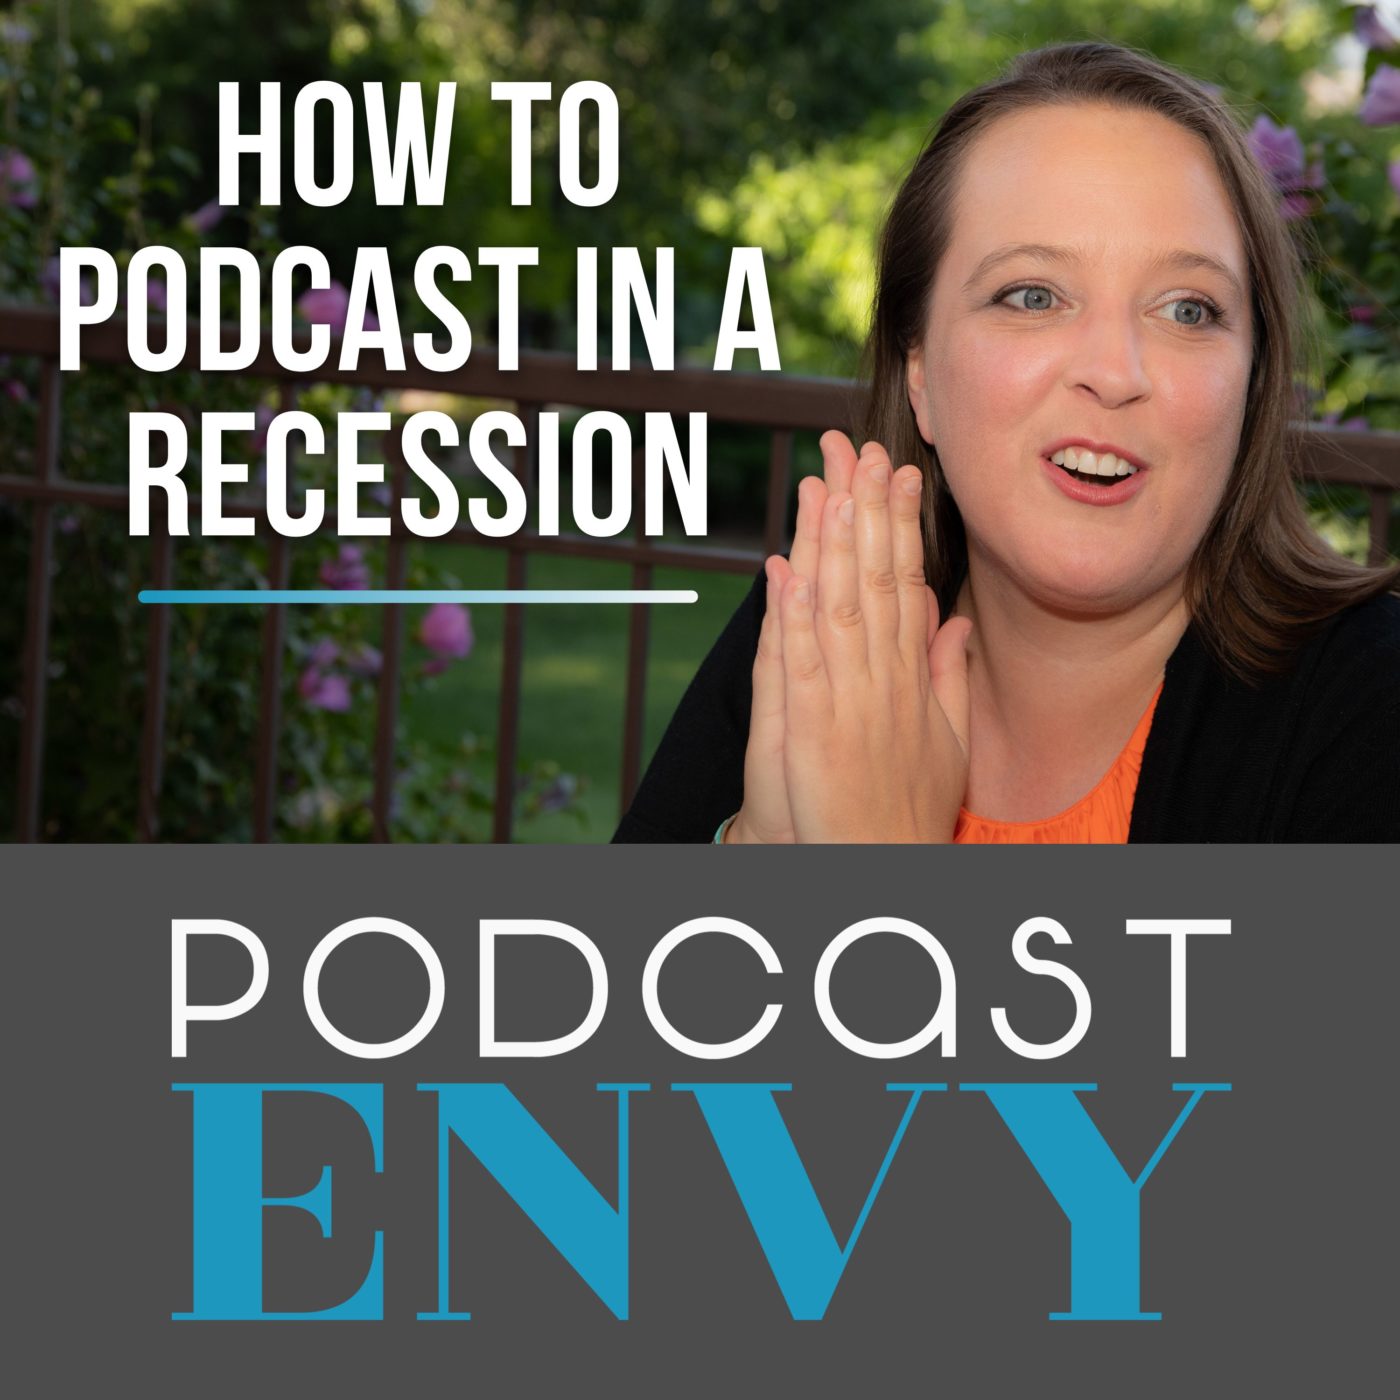 How To Podcast in a Recession with Andrea Klunder